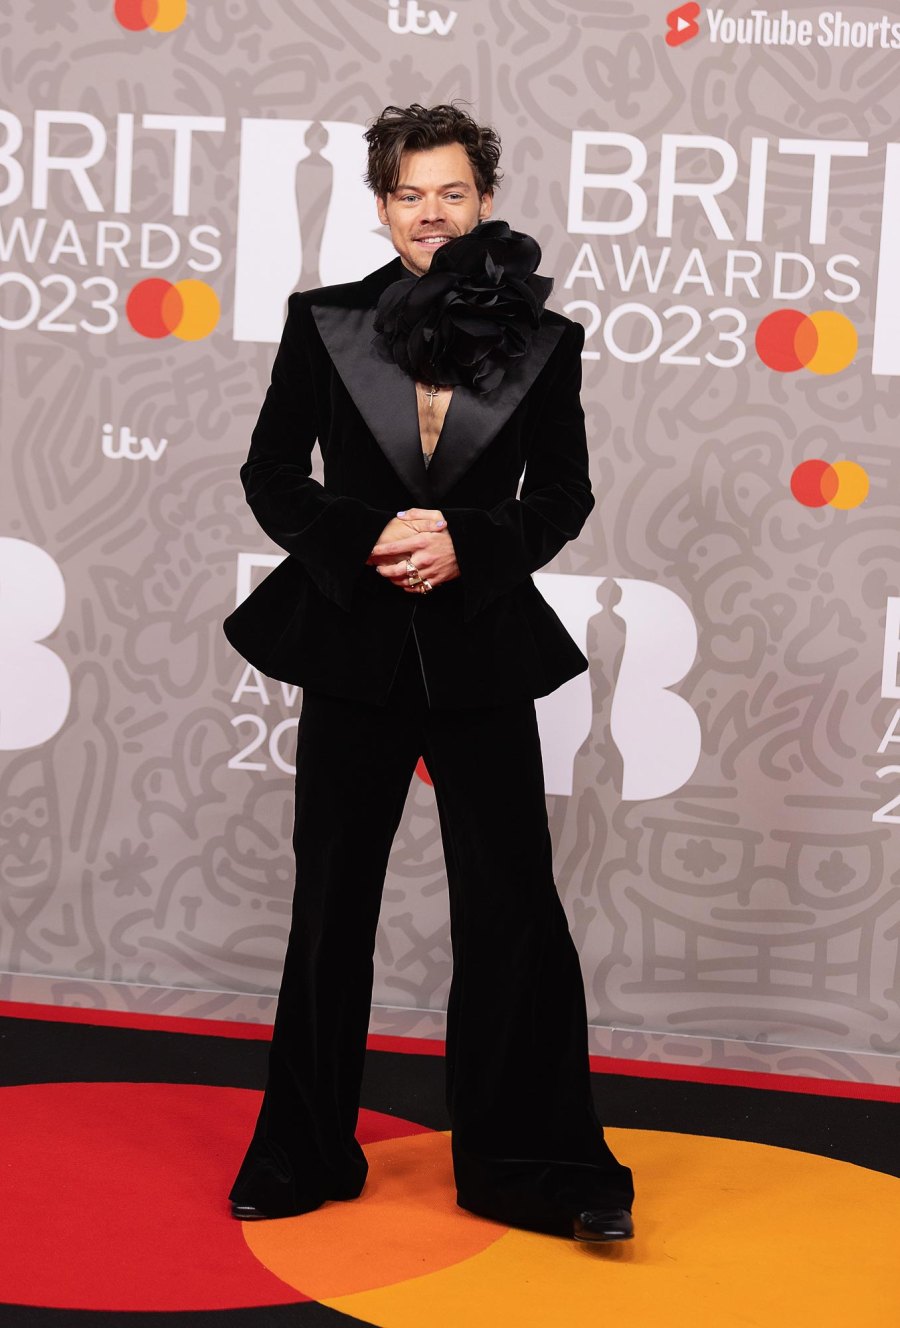 The Fiercest Fashion Risk Takers of 2023 Rihanna Cardi B Harry Styles and More 112 Harry Styles attends The BRIT Awards 2023